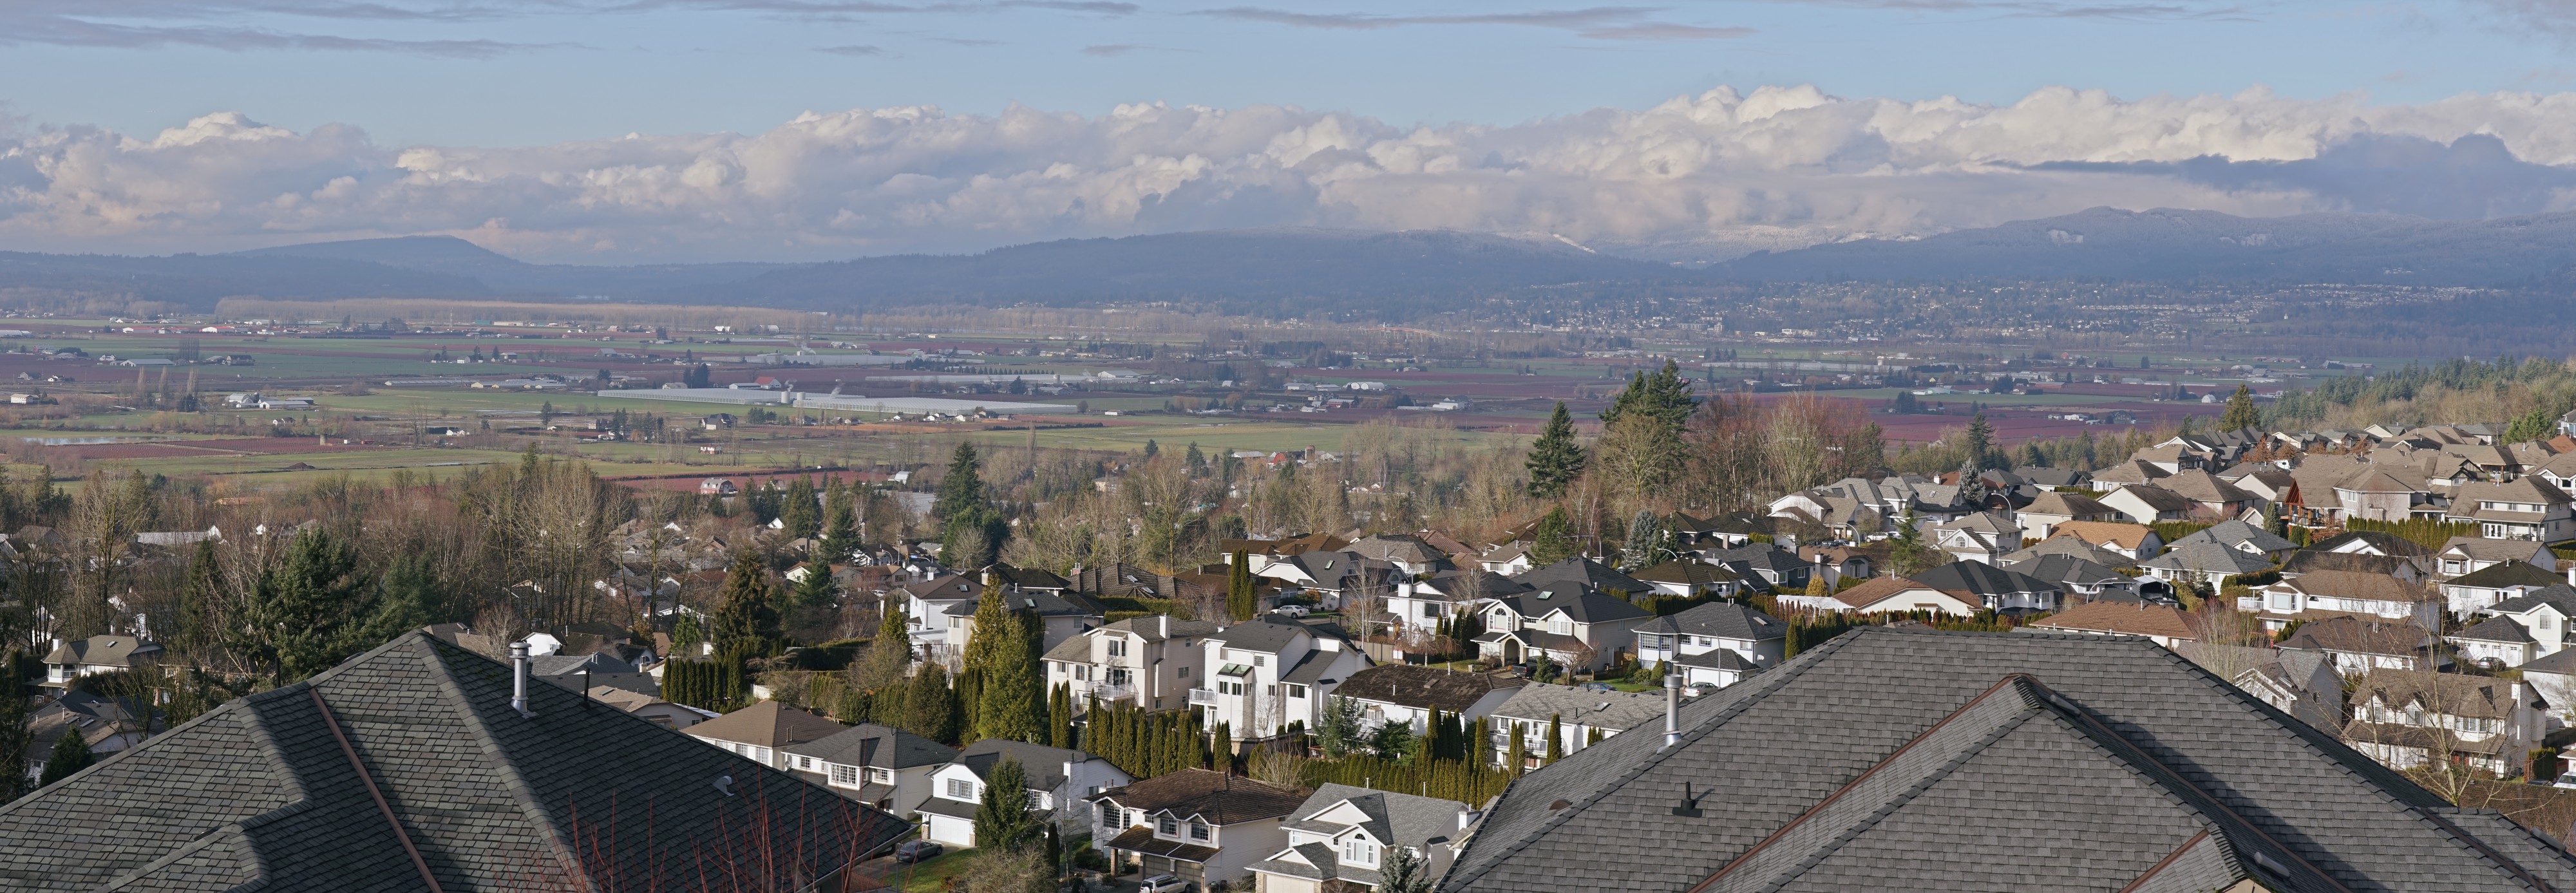 Fraser Valley Panorama 4